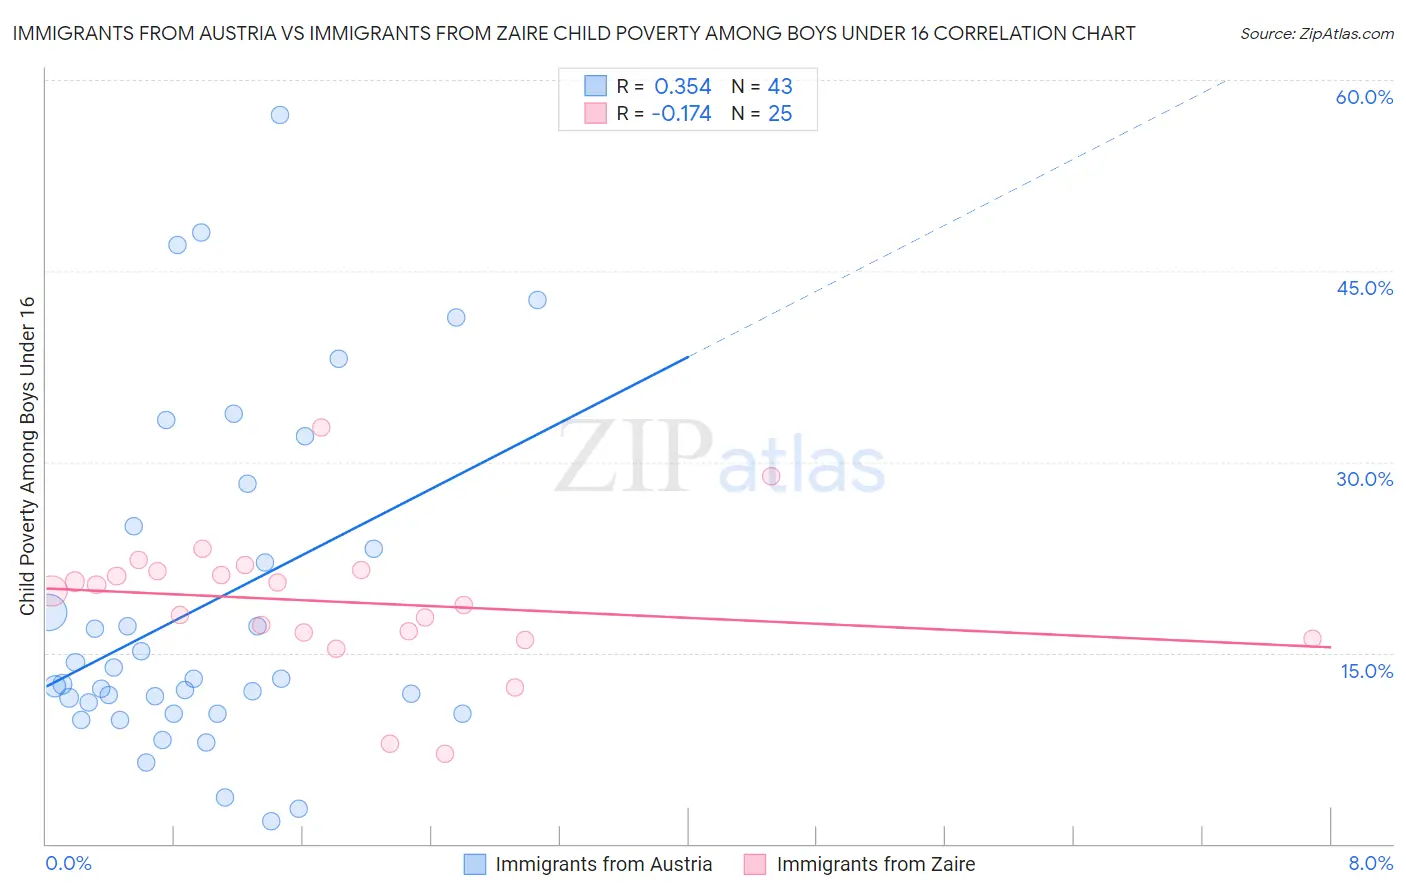 Immigrants from Austria vs Immigrants from Zaire Child Poverty Among Boys Under 16